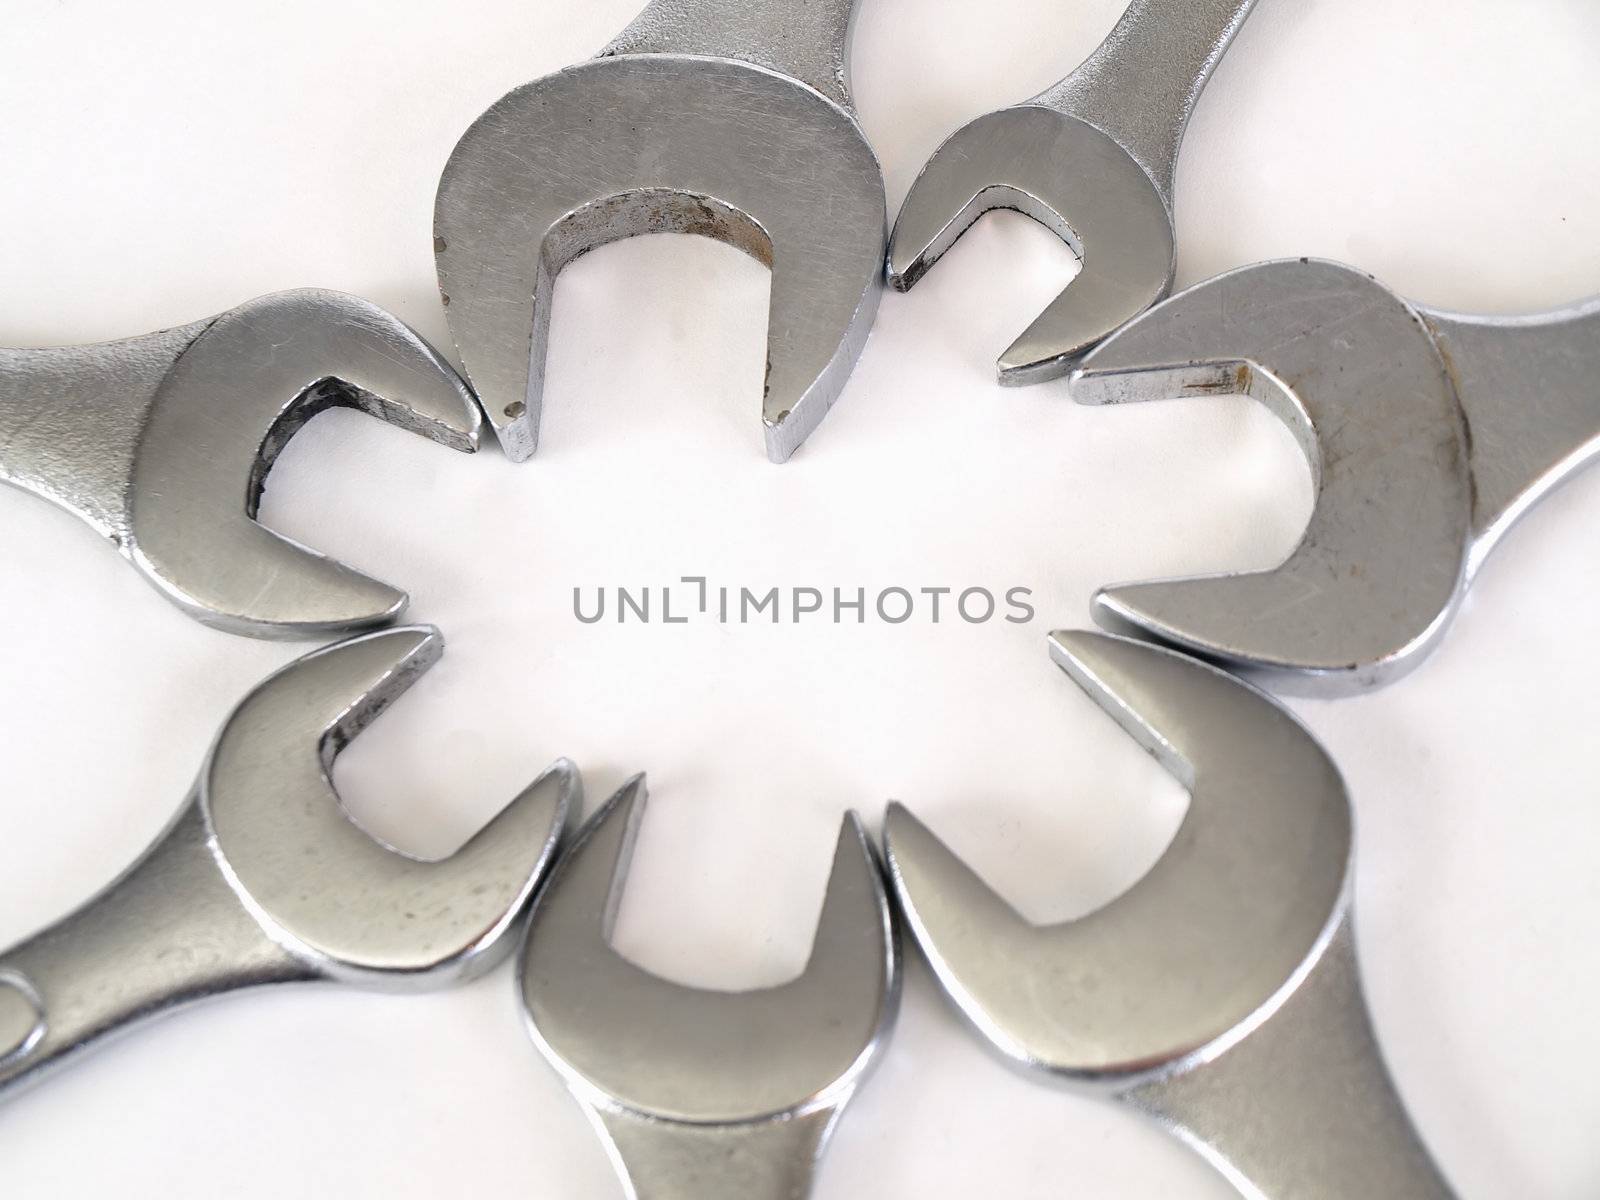 Crescent wrenches set in a flower bloom pattern over a white background.